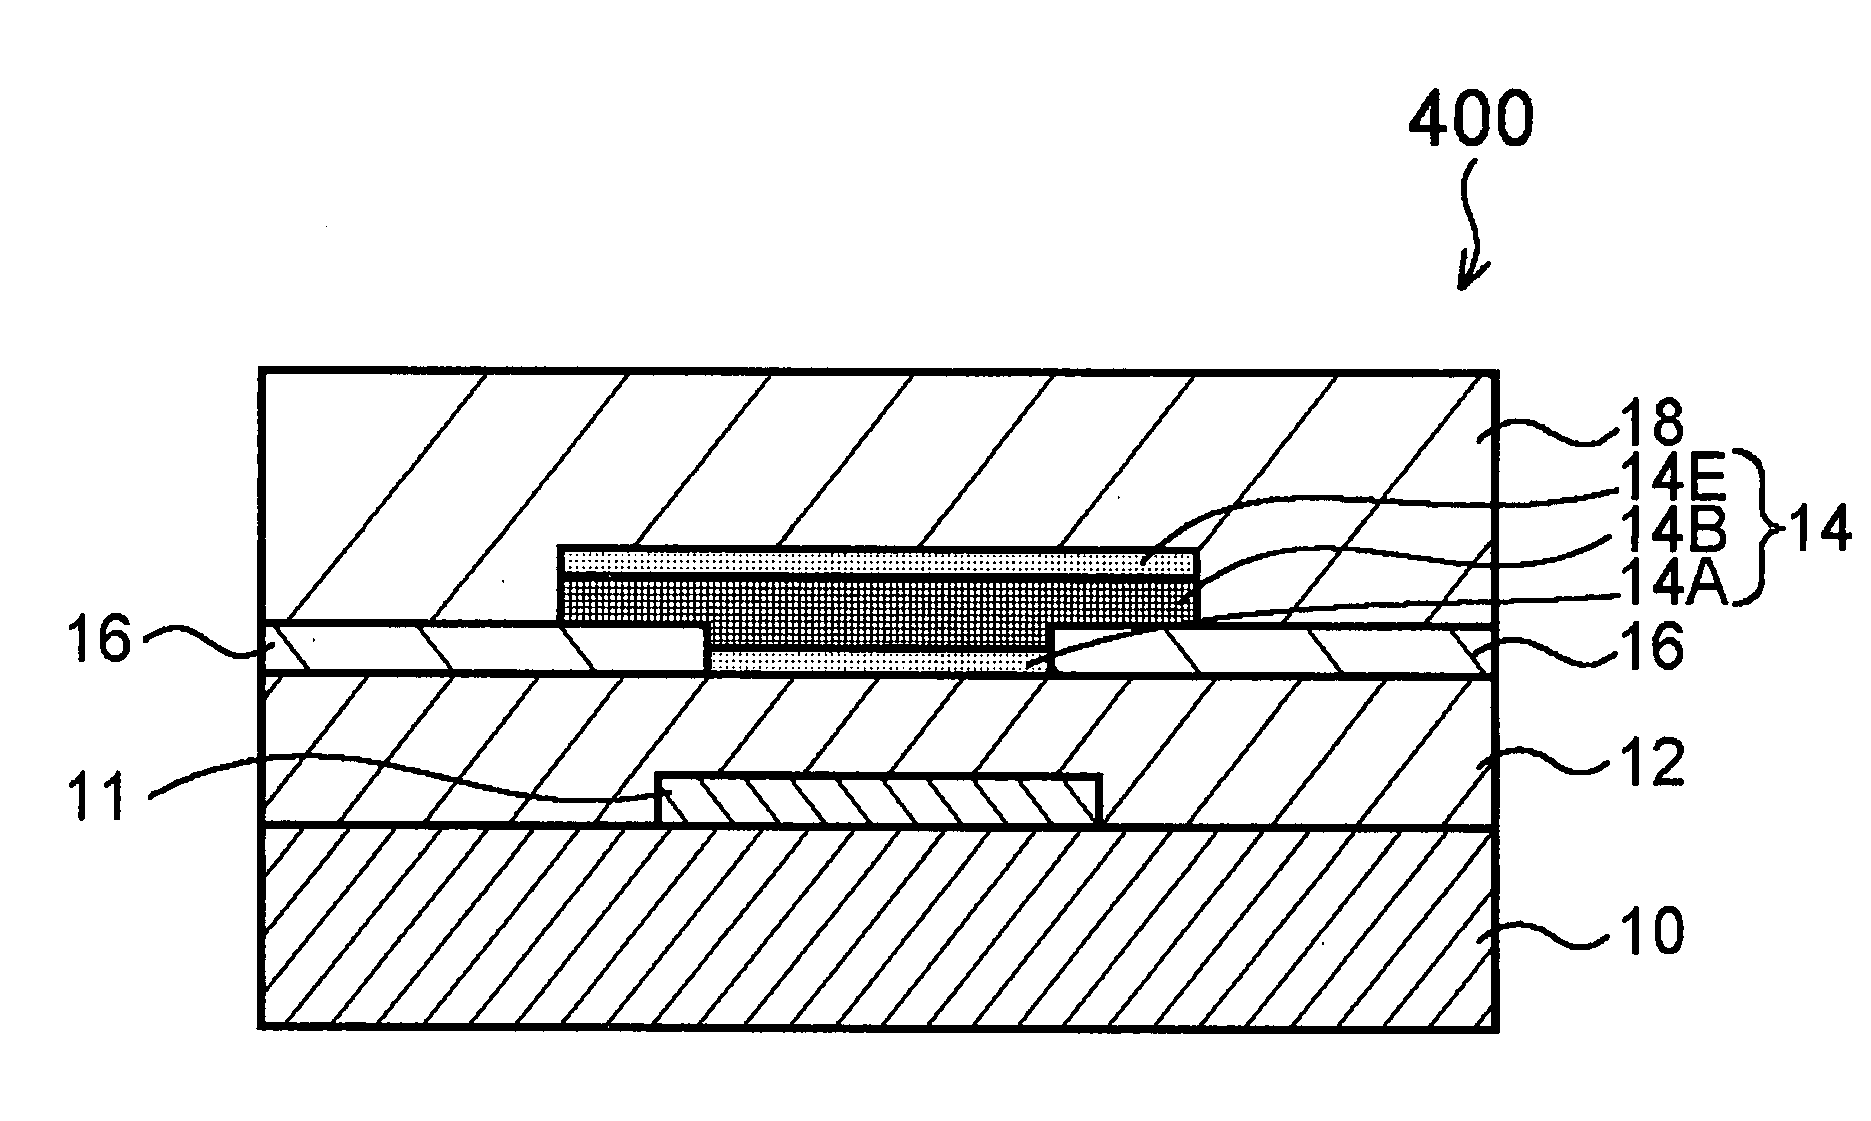 Thin-film device and method of fabricating the same